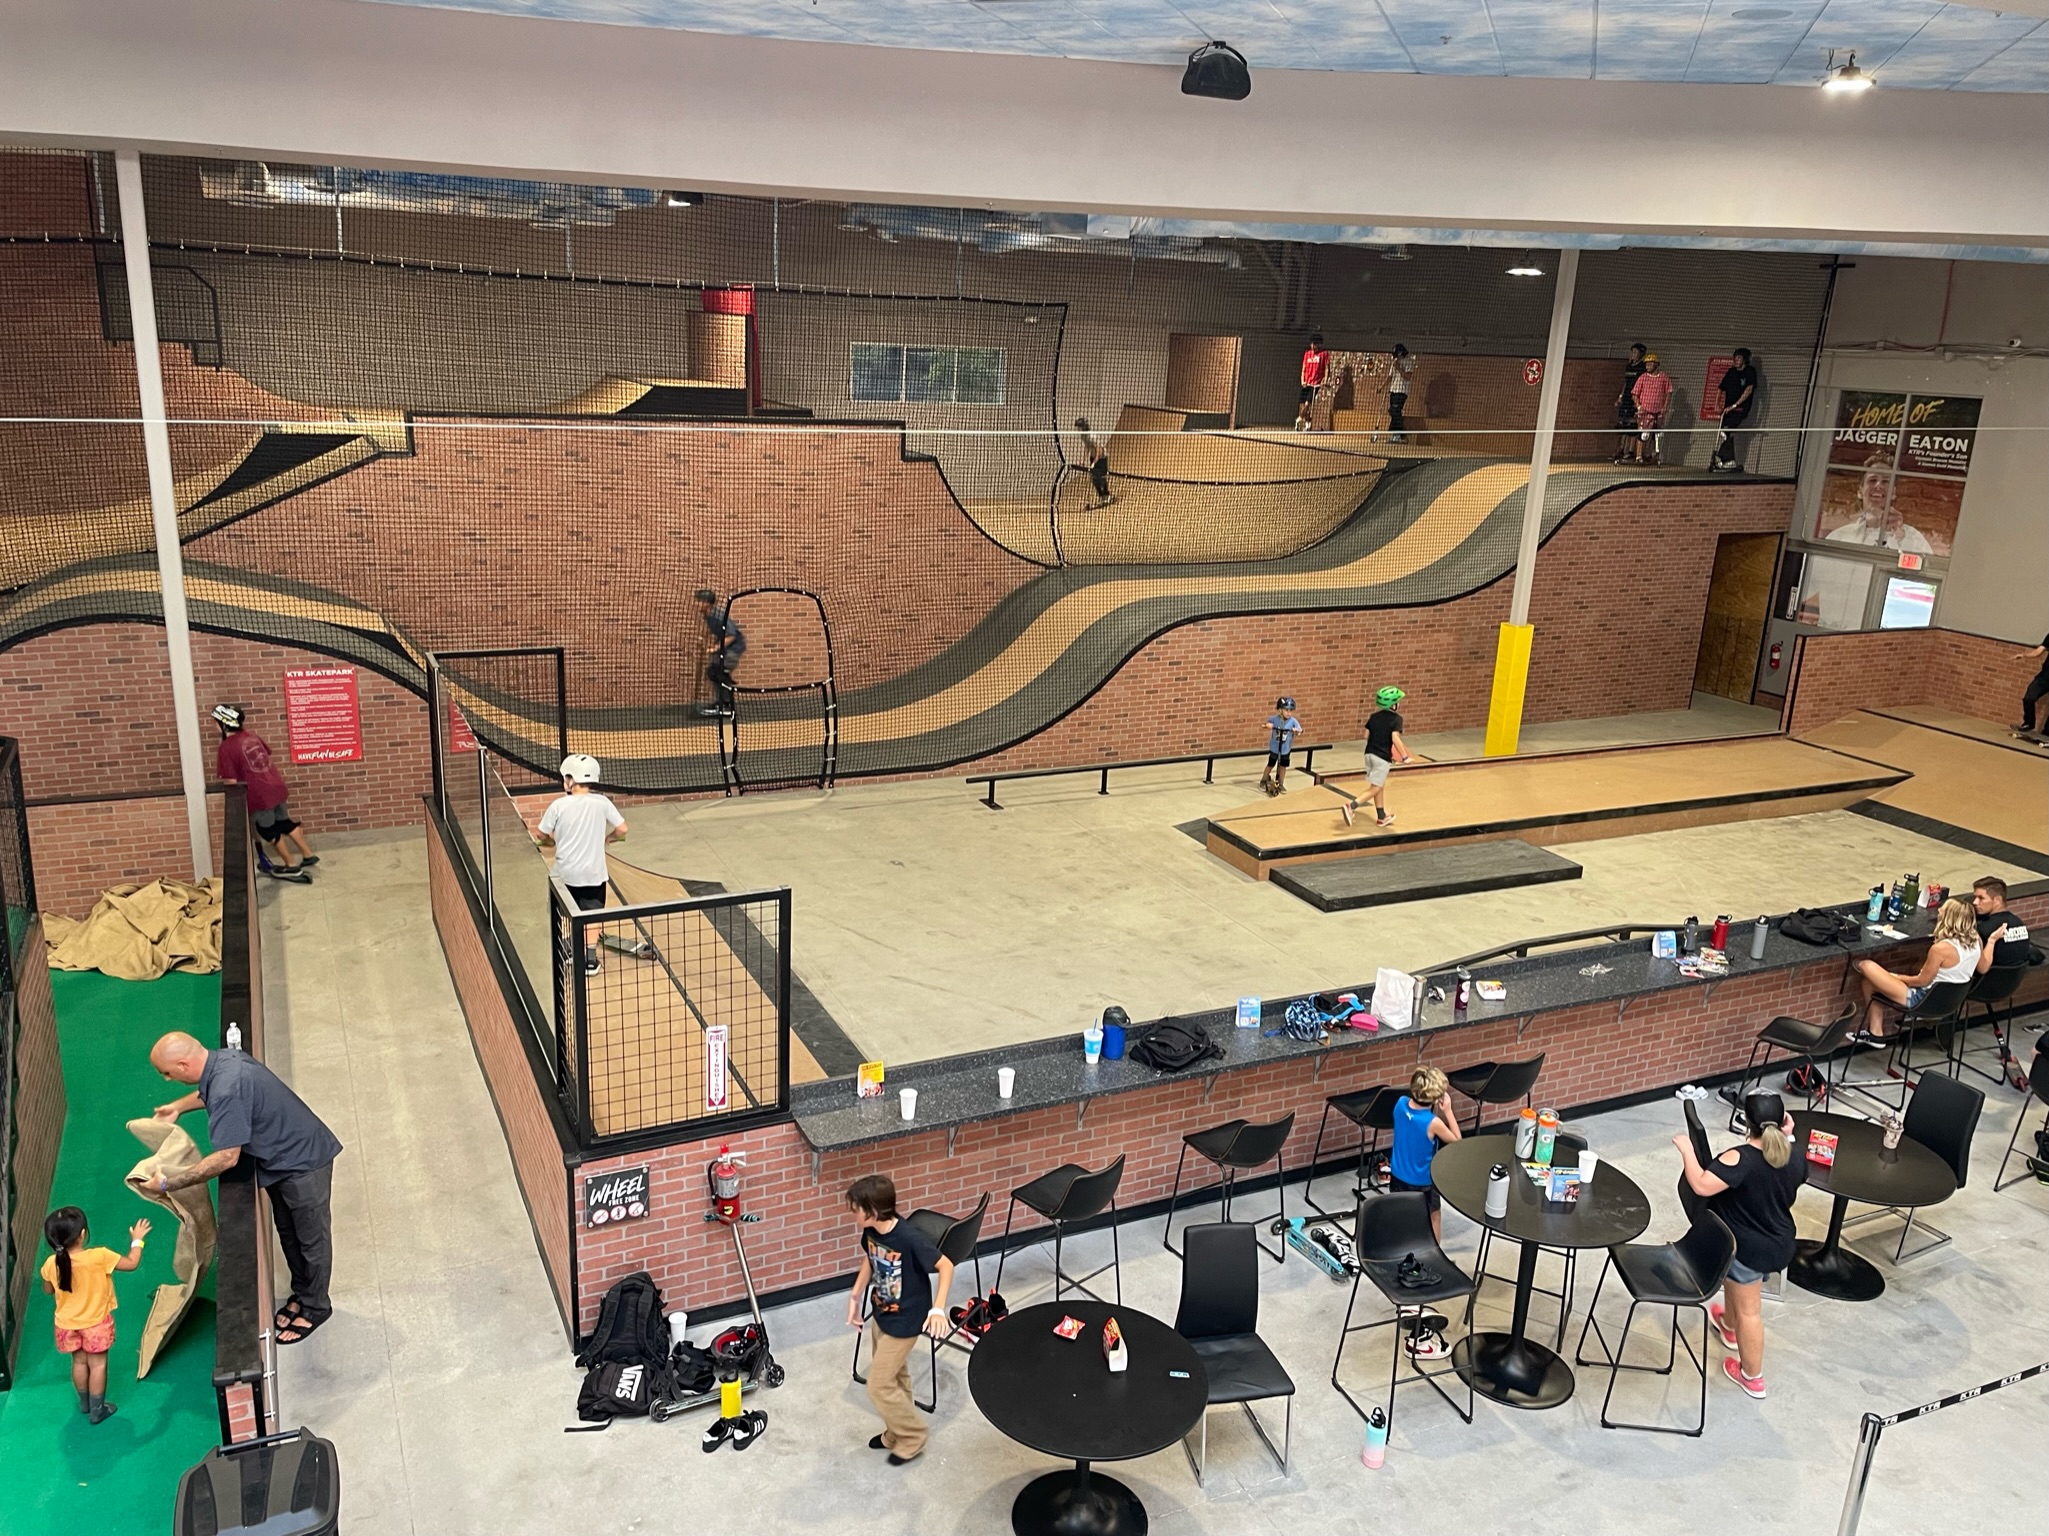 State-of-the-art indoor skatepark available for beginners to advanced athletes